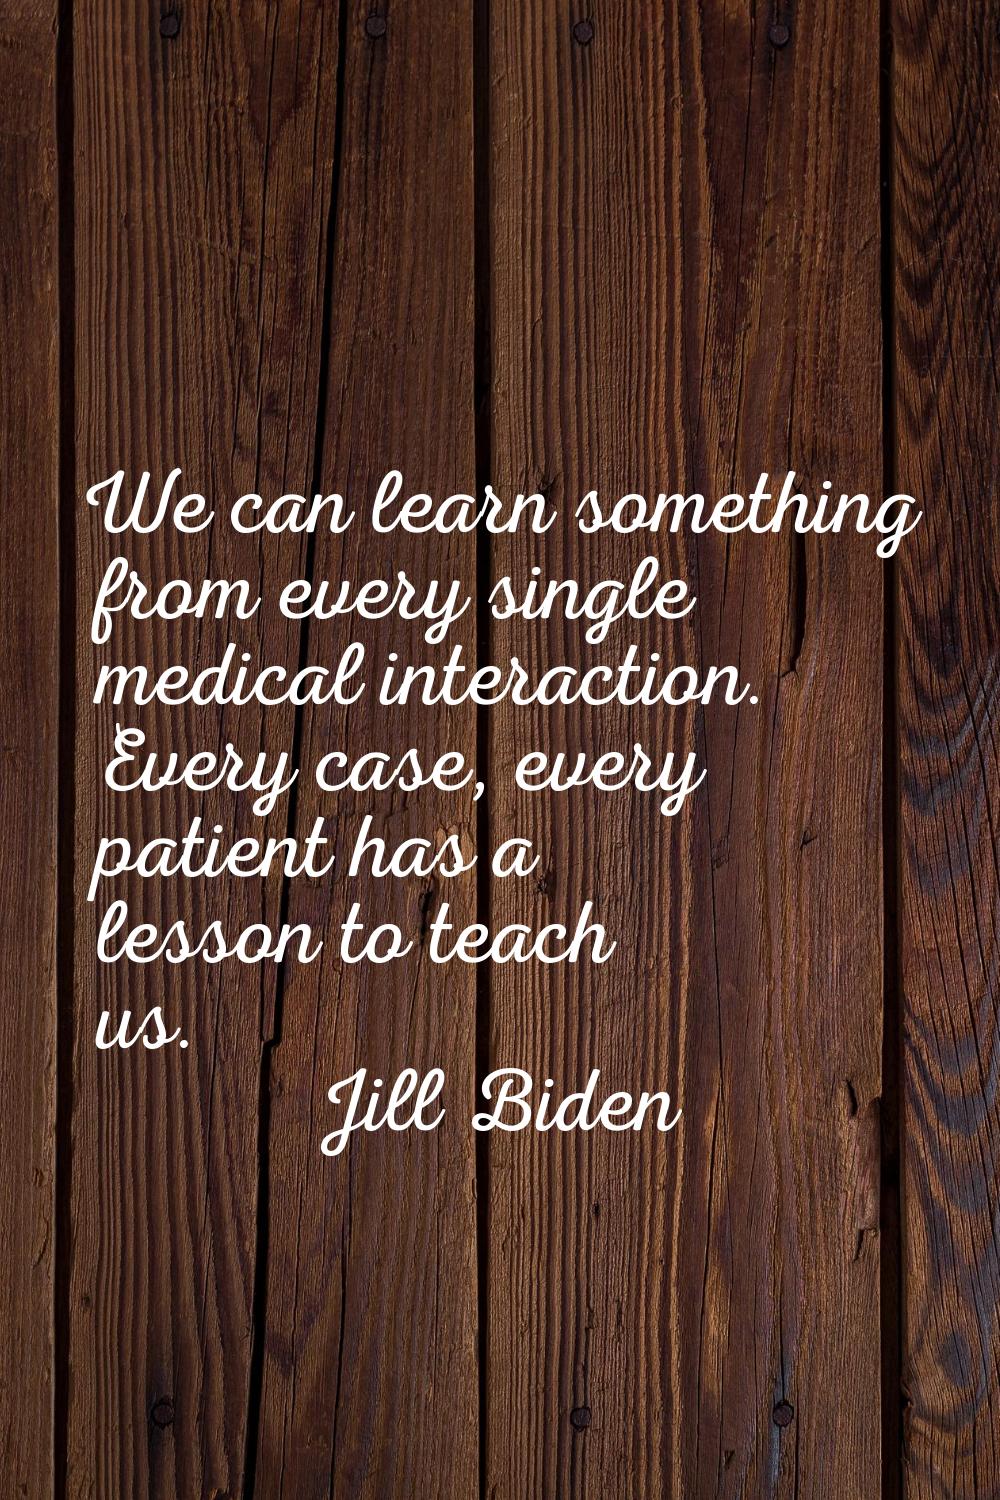 We can learn something from every single medical interaction. Every case, every patient has a lesso